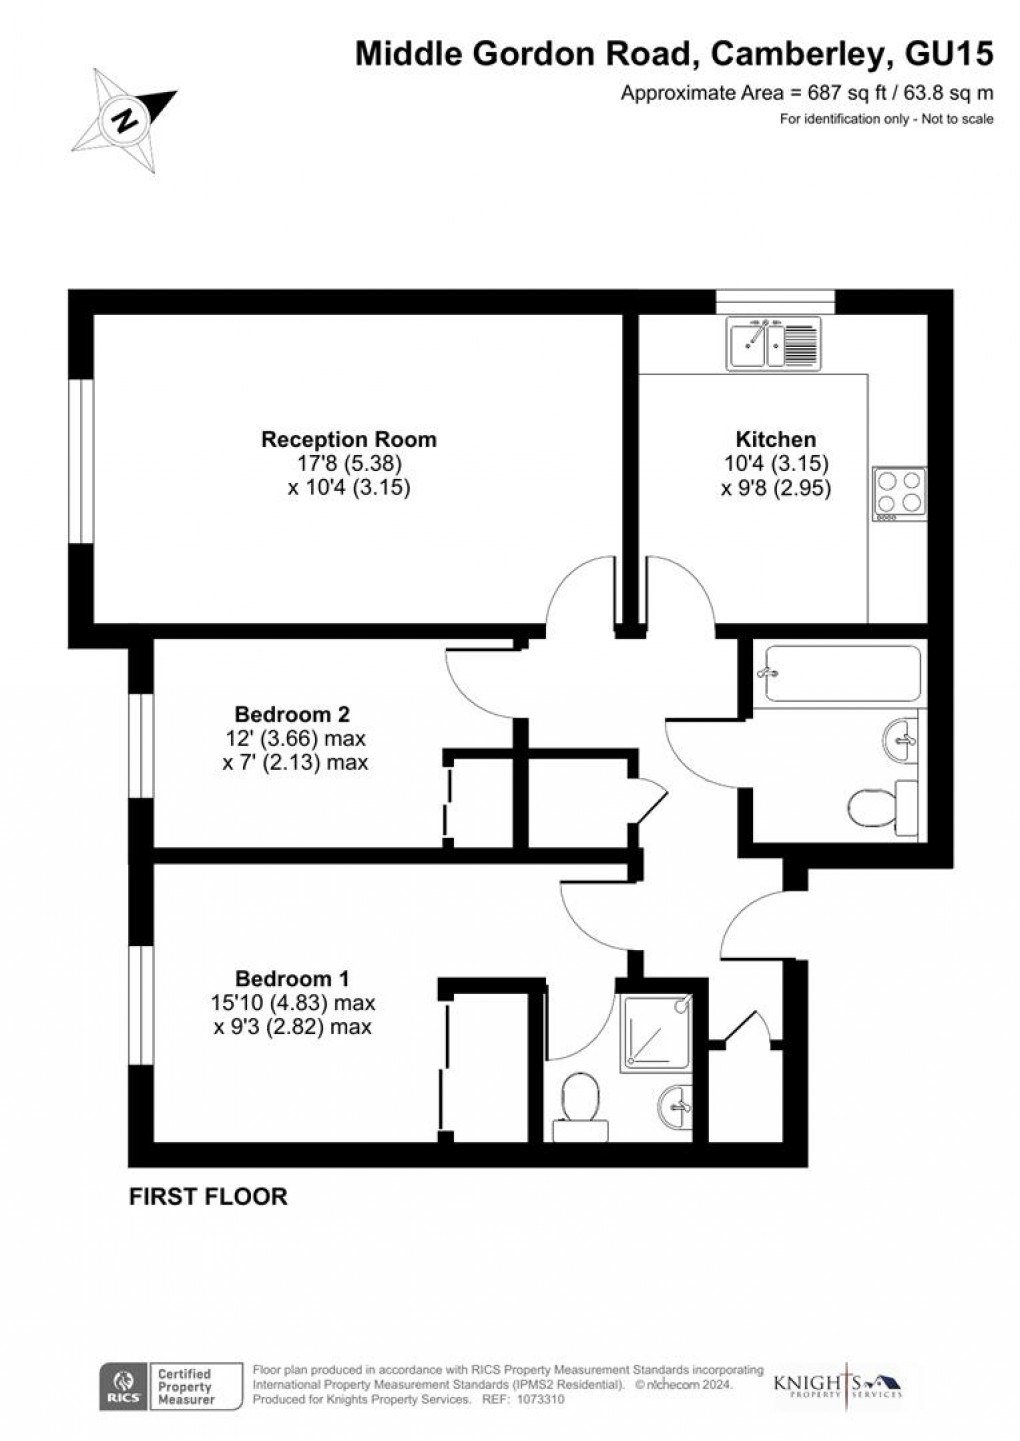 Floorplan for 75 Middle Gordon Road, Camberley